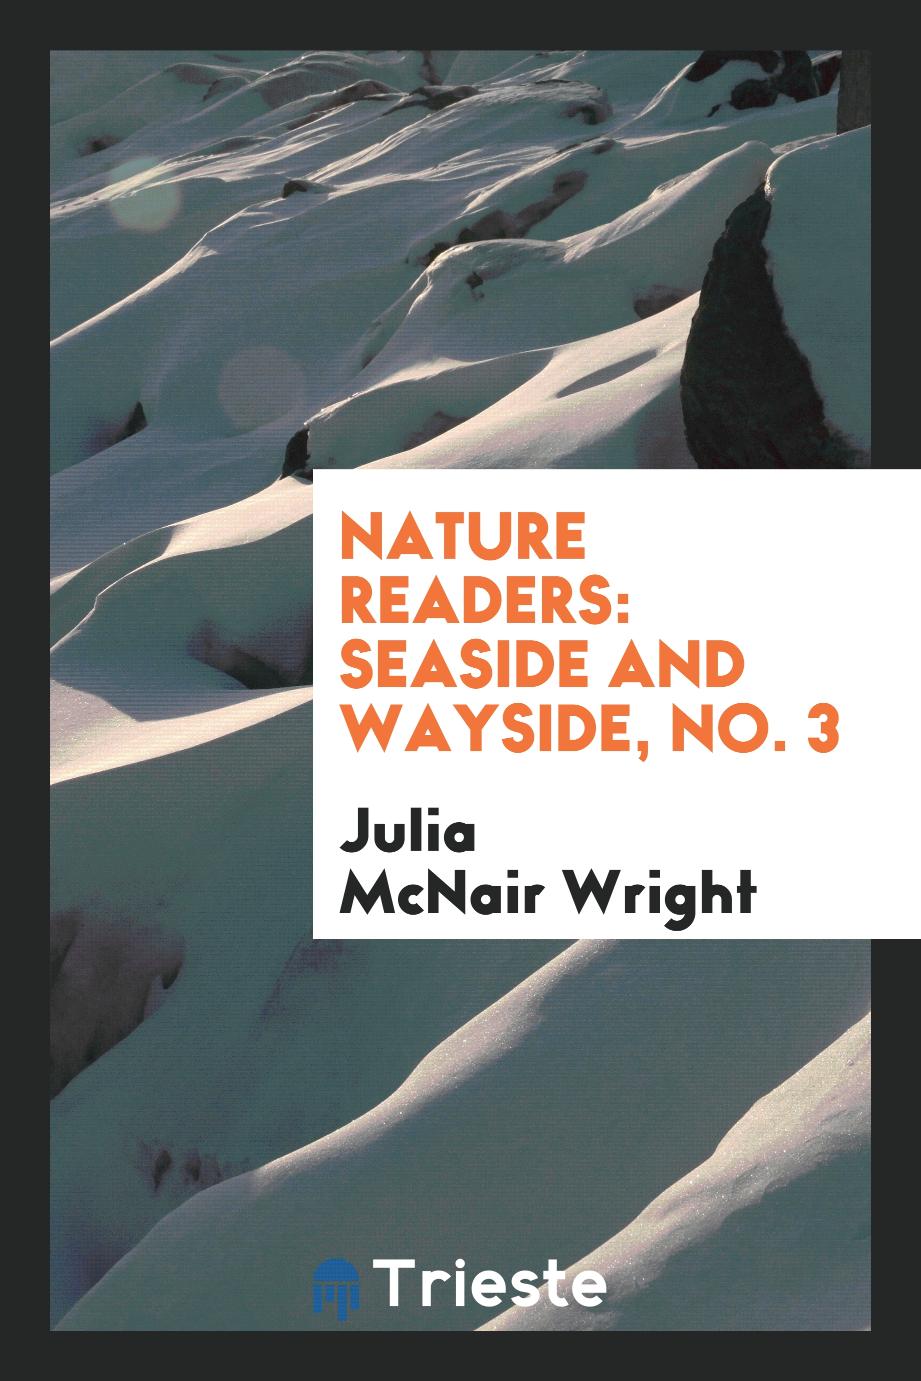 Nature Readers: Seaside and Wayside, No. 3